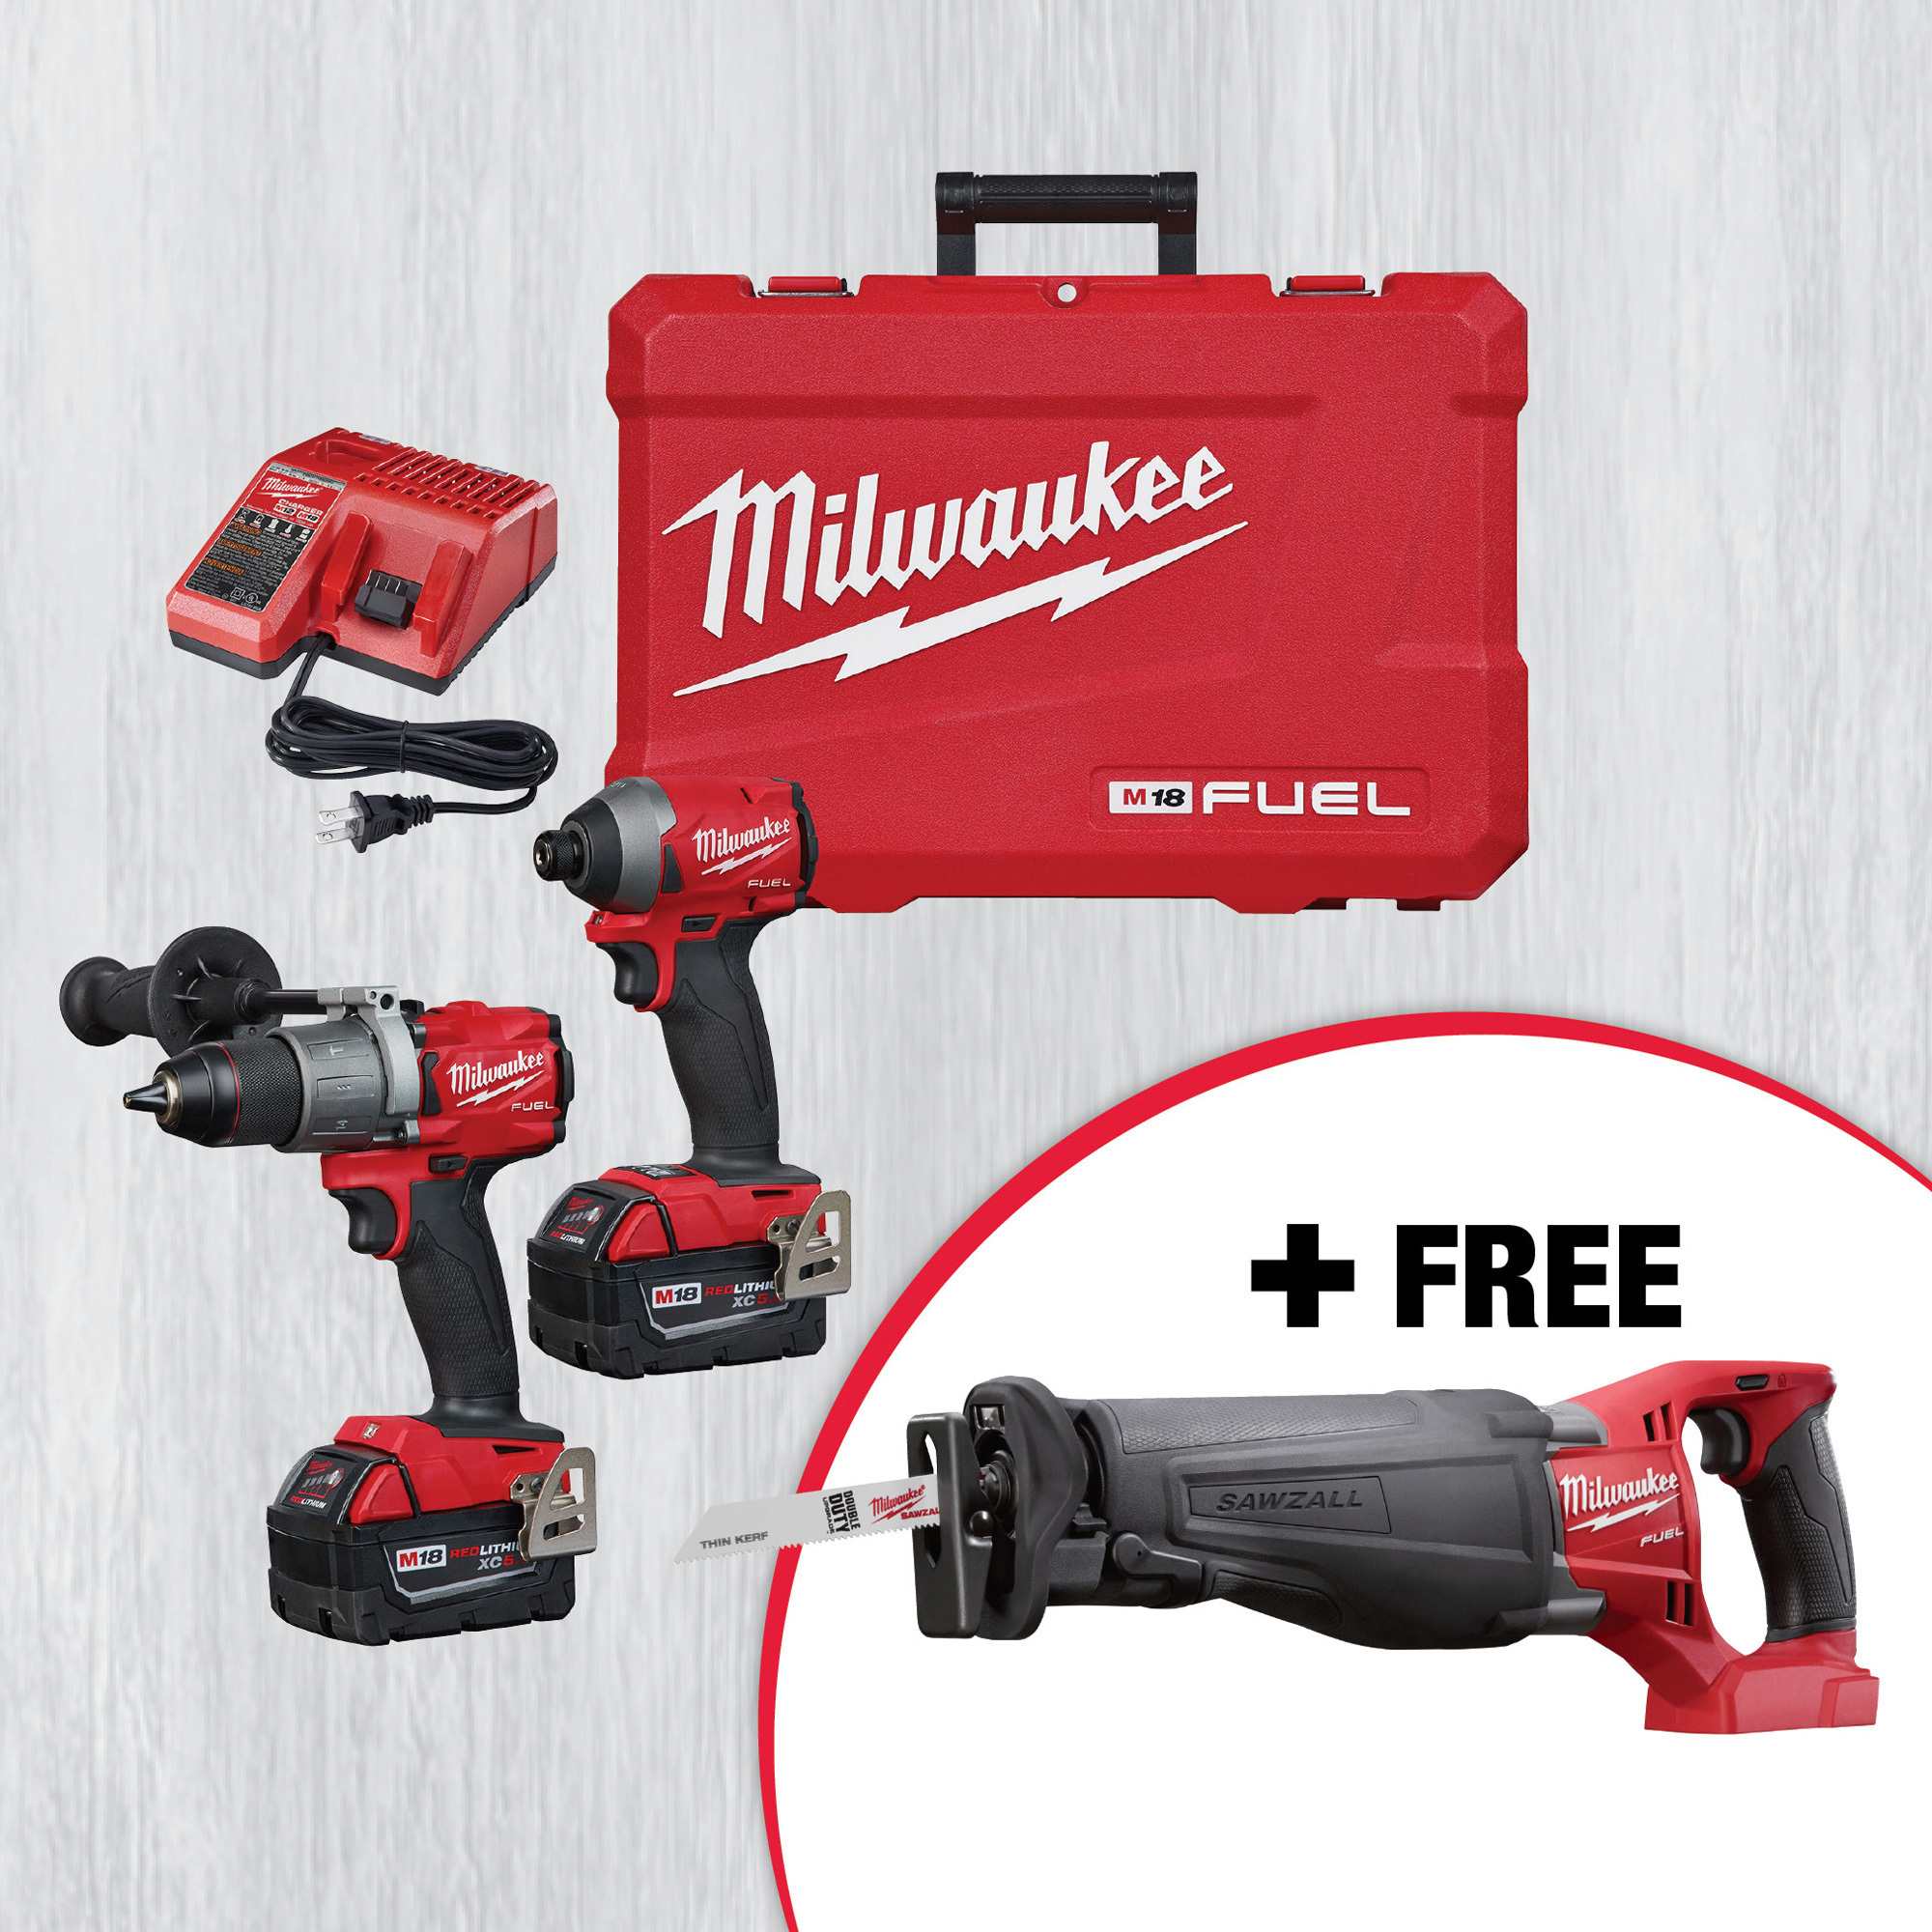 SPECIAL BUY! M18 FUEL Cordless 1/2in. Hammer Drill/Driver and 1/4in. Hex  Impact Driver Combo Set (2997-22) with FREE M18 FUEL Sawzall Reciprocating  Saw (2720-20)! Northern Tool